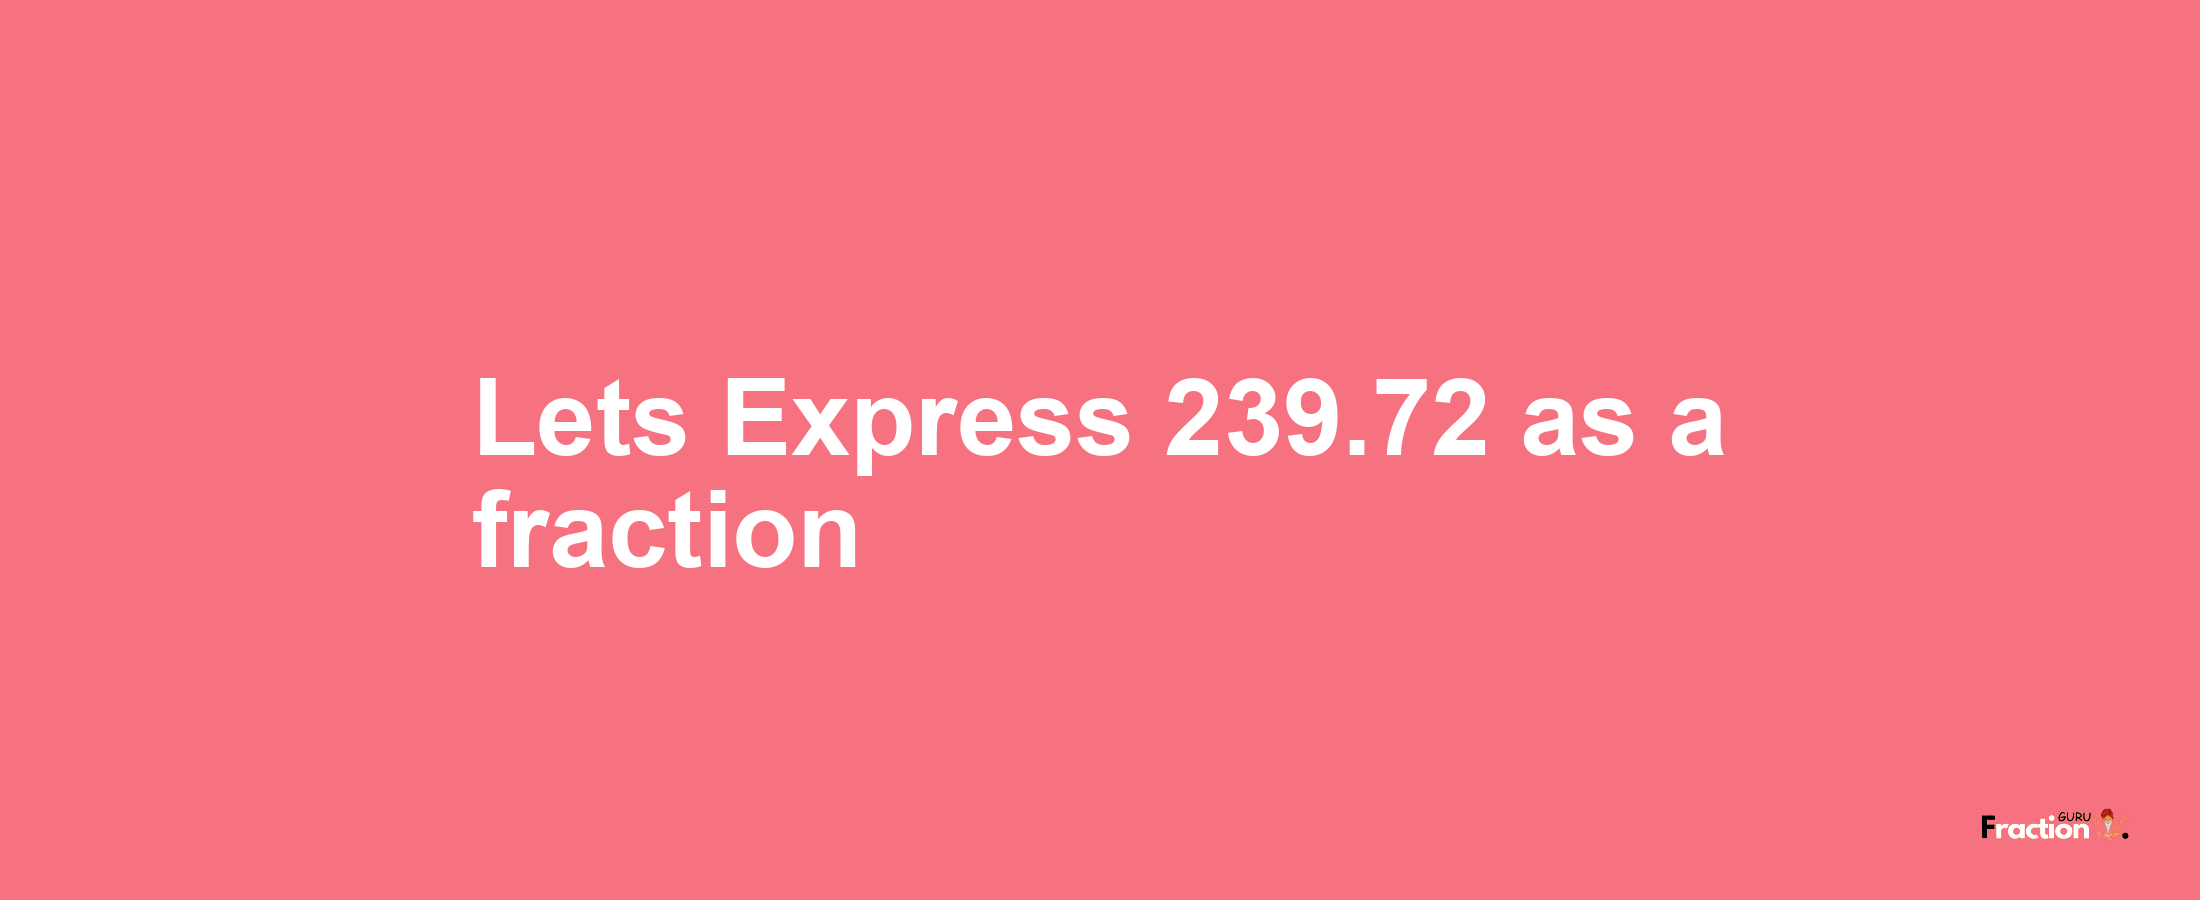 Lets Express 239.72 as afraction